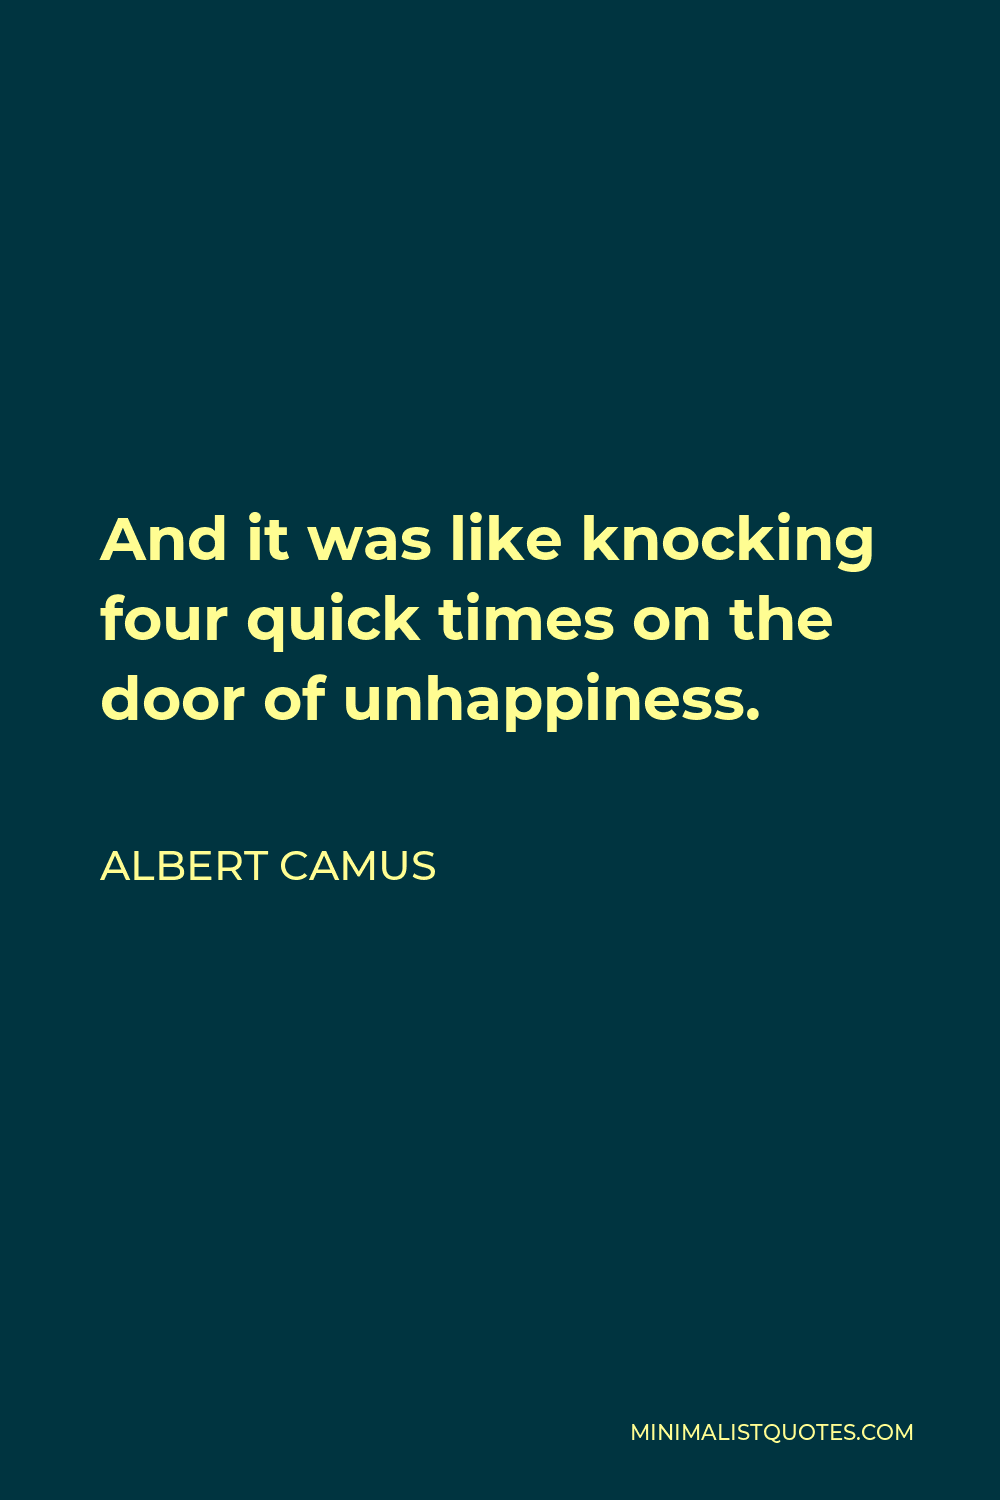 Albert Camus Quote: And it was like knocking four quick times on the ...